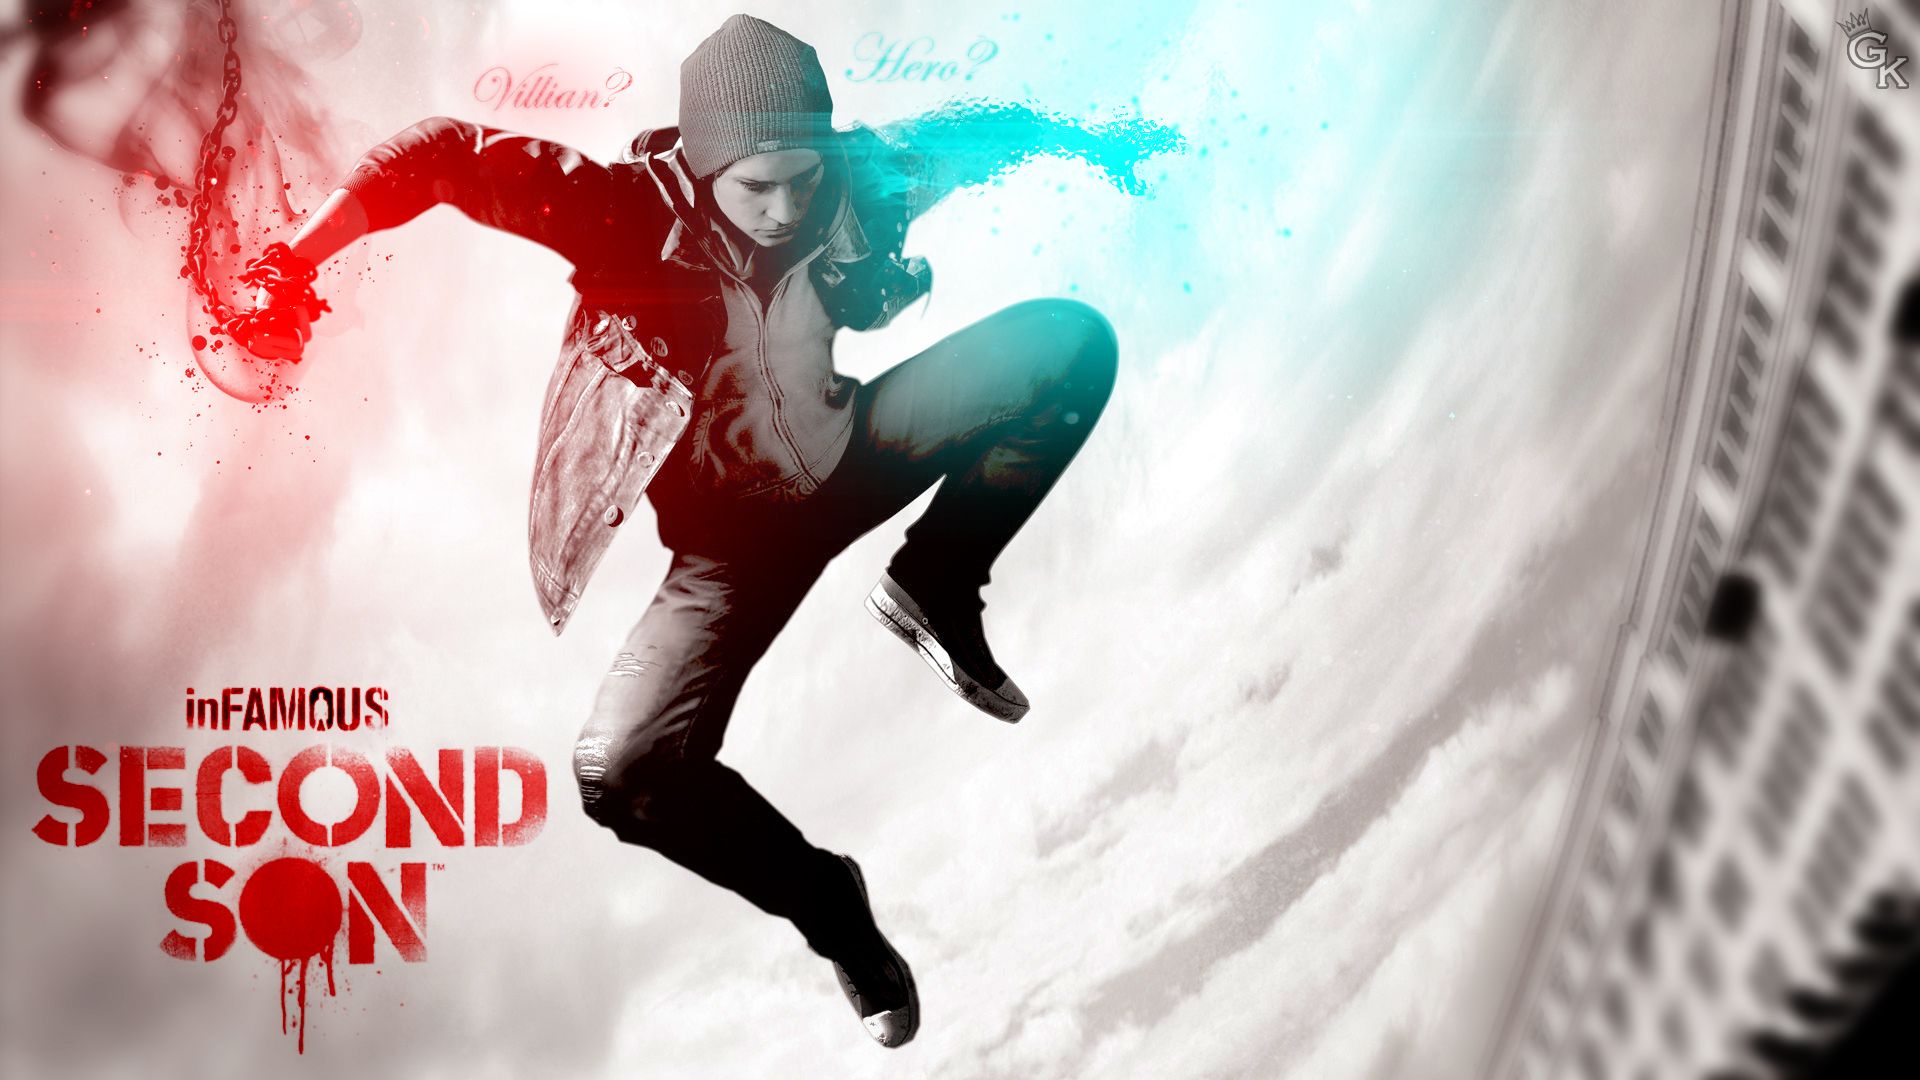 Infamous Second Son Cool - 1920x1080 Wallpaper 